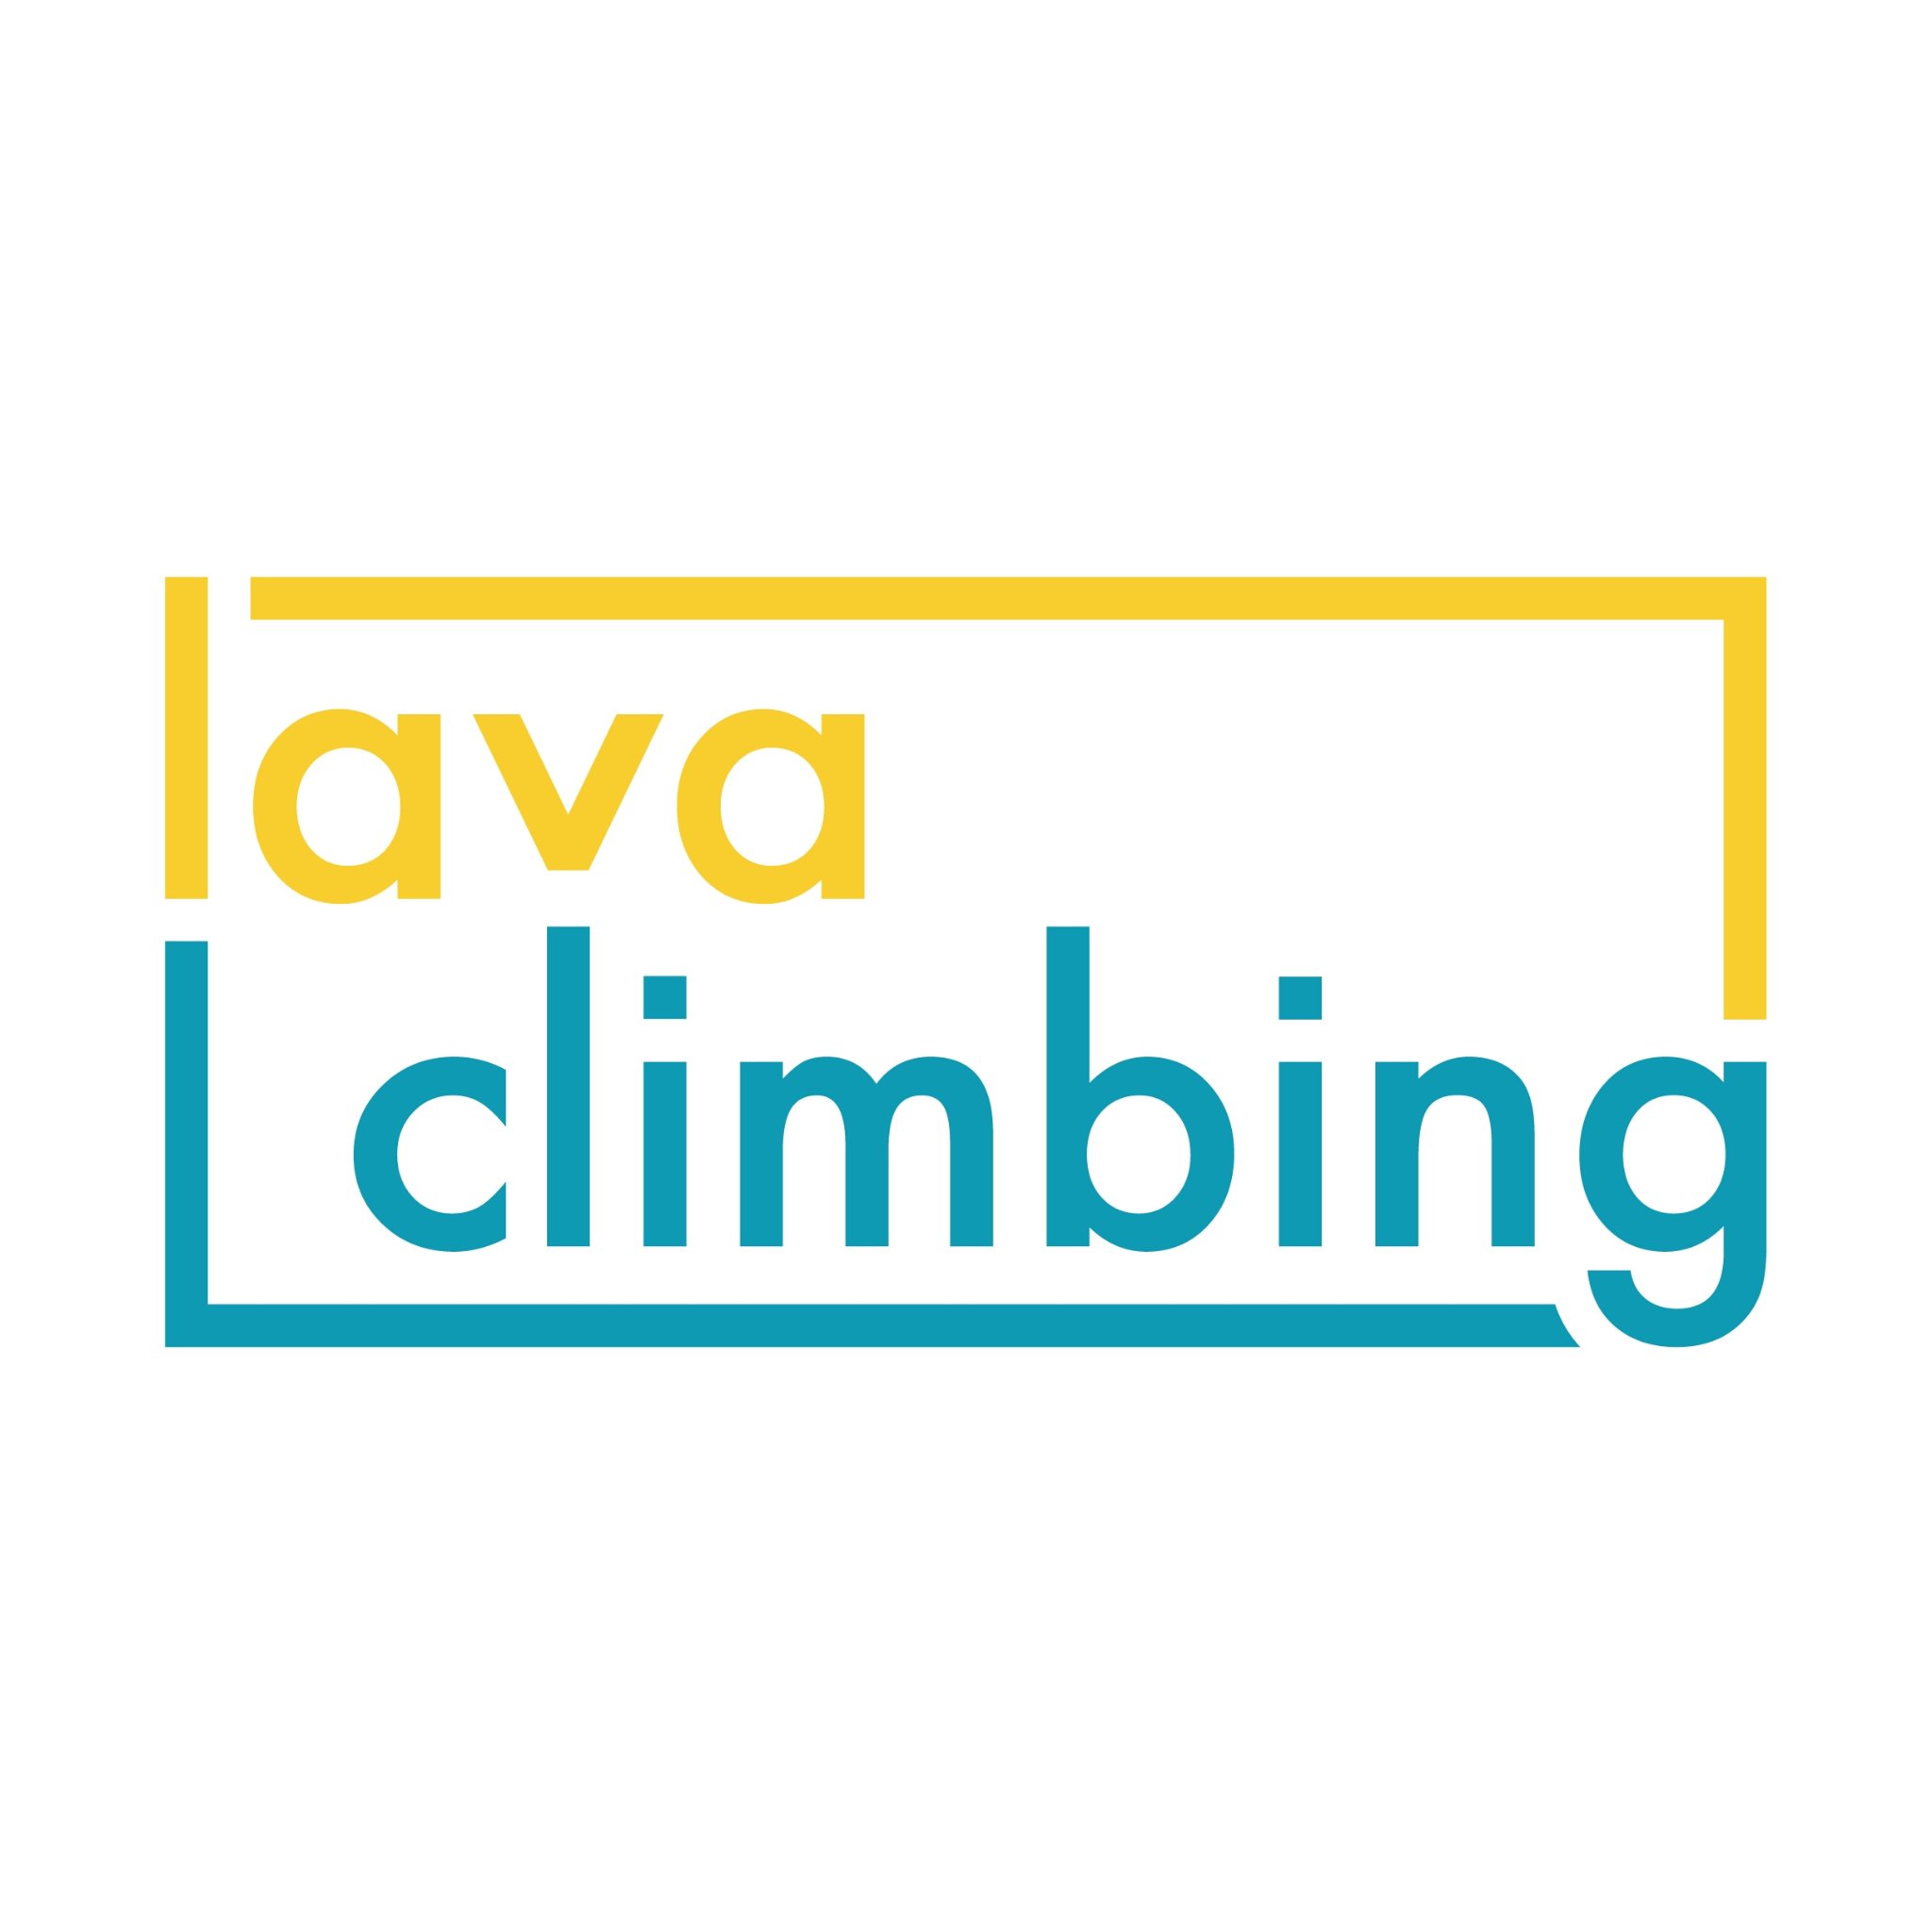 A brand established in Ecuador, Lava Climbing develops innovative and durable equipment for climbers, mountaineers and adventurers.